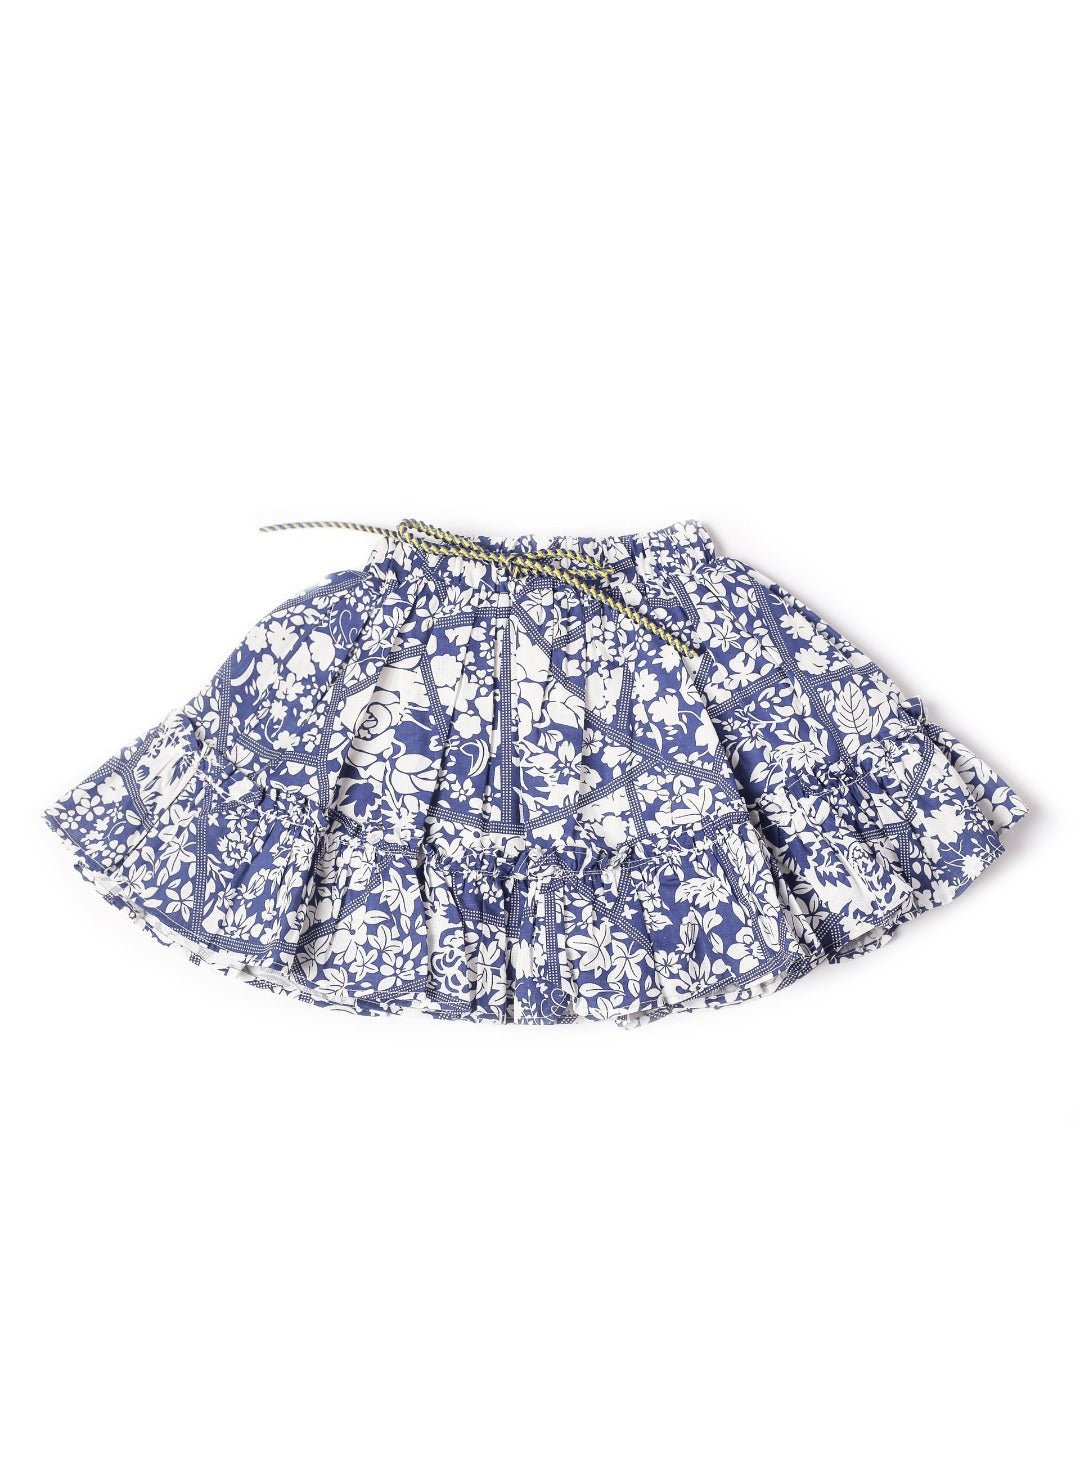 midnight blue puffy skirt with white flowers pattern